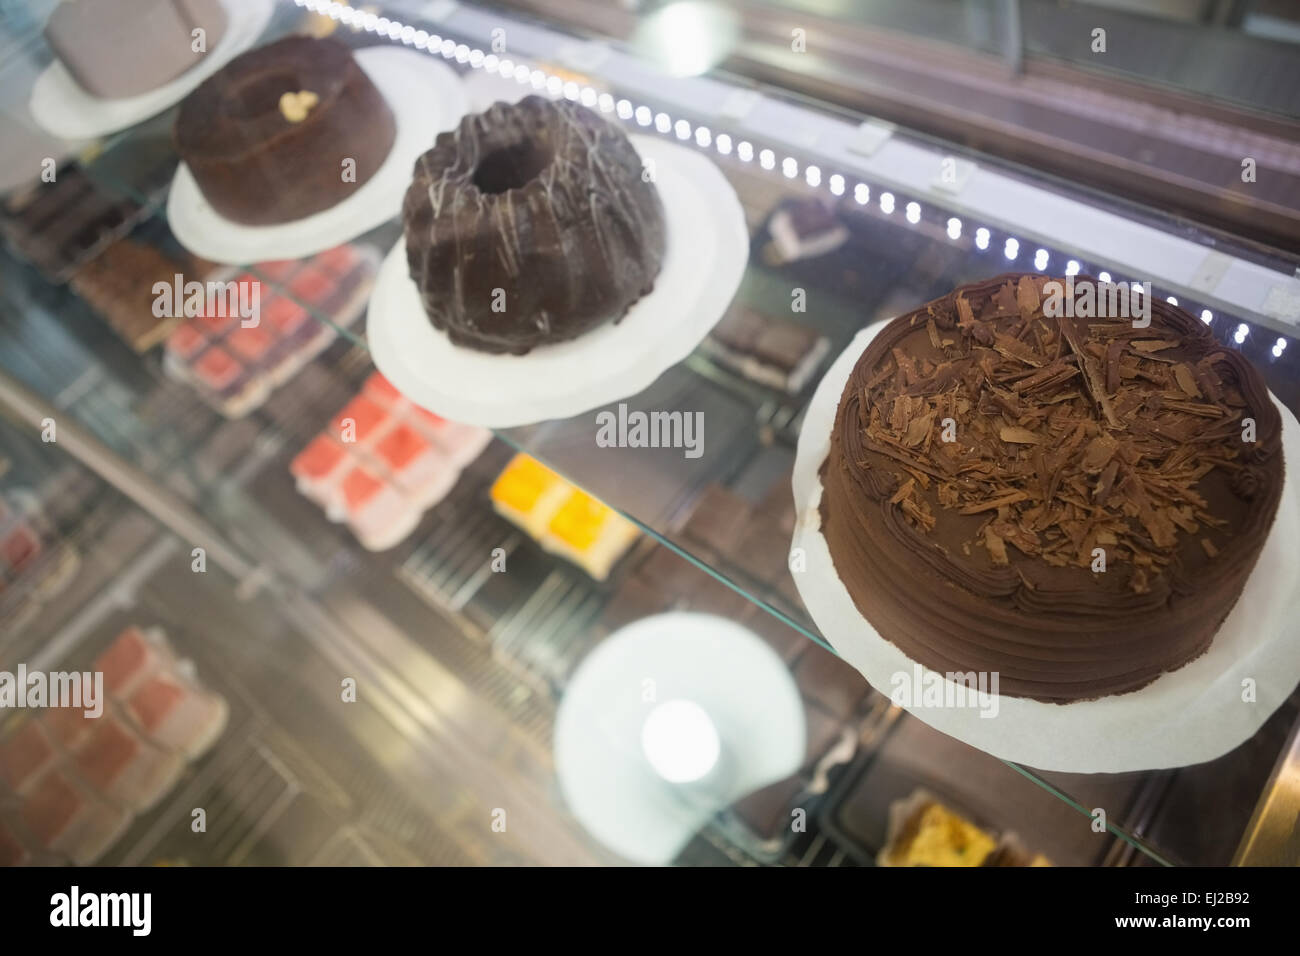 Display case with chocolate cakes Stock Photo